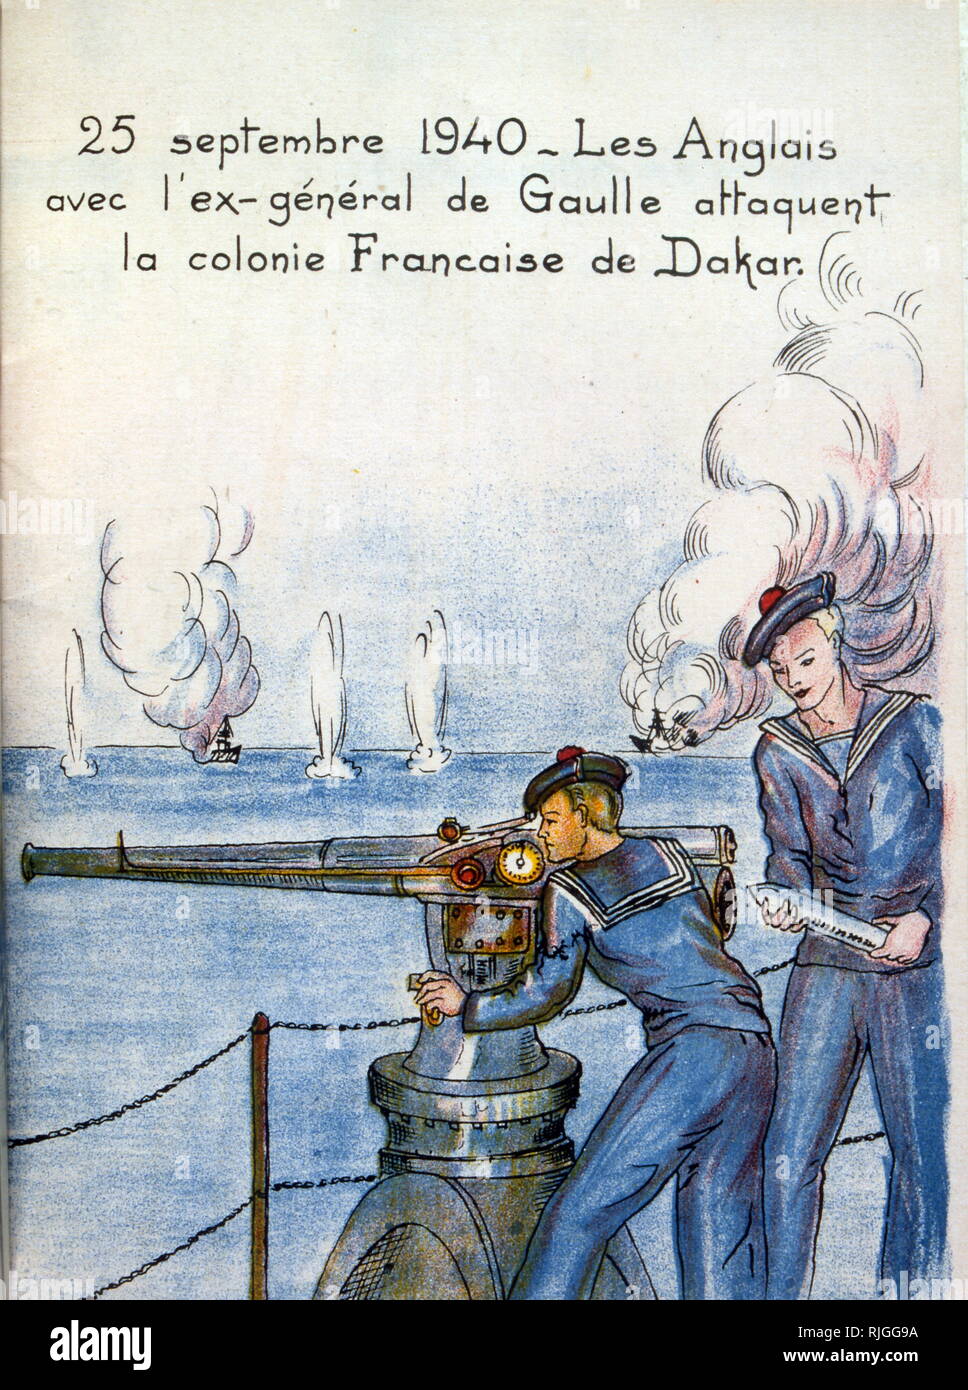 French occupation propaganda illustration showing Free French and British forces attempt a landing at Dakar, French West Africa; Vichy French naval forces open fire sporadically for two days, and the expedition is called back. 1940 Stock Photo